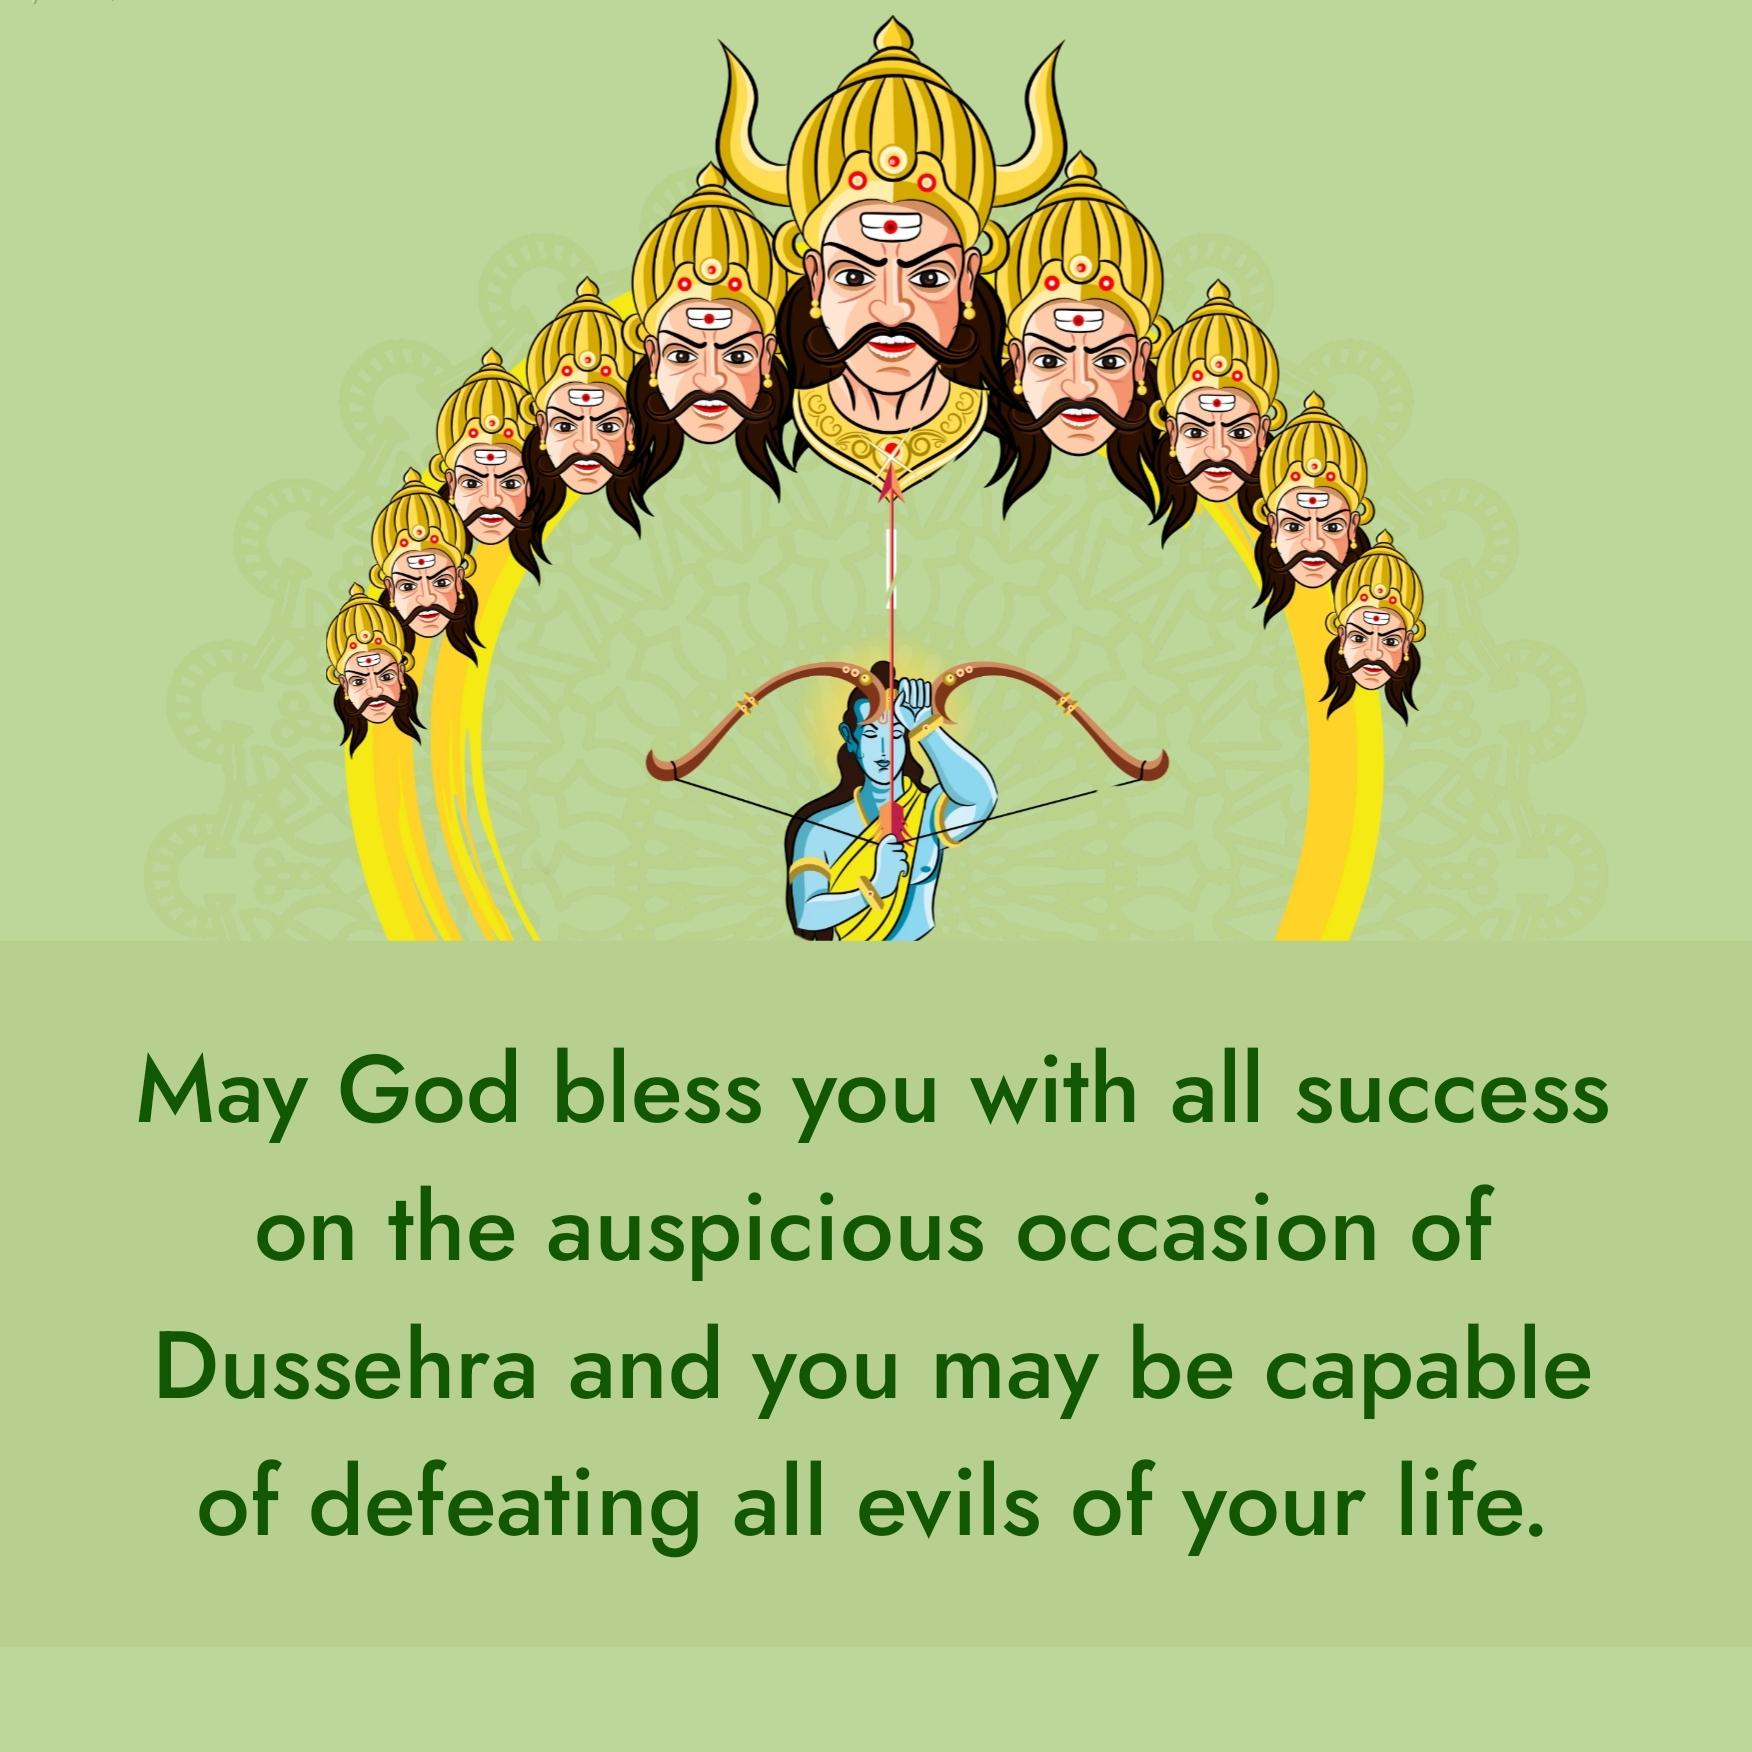 May God bless you with all success on the auspicious occasion